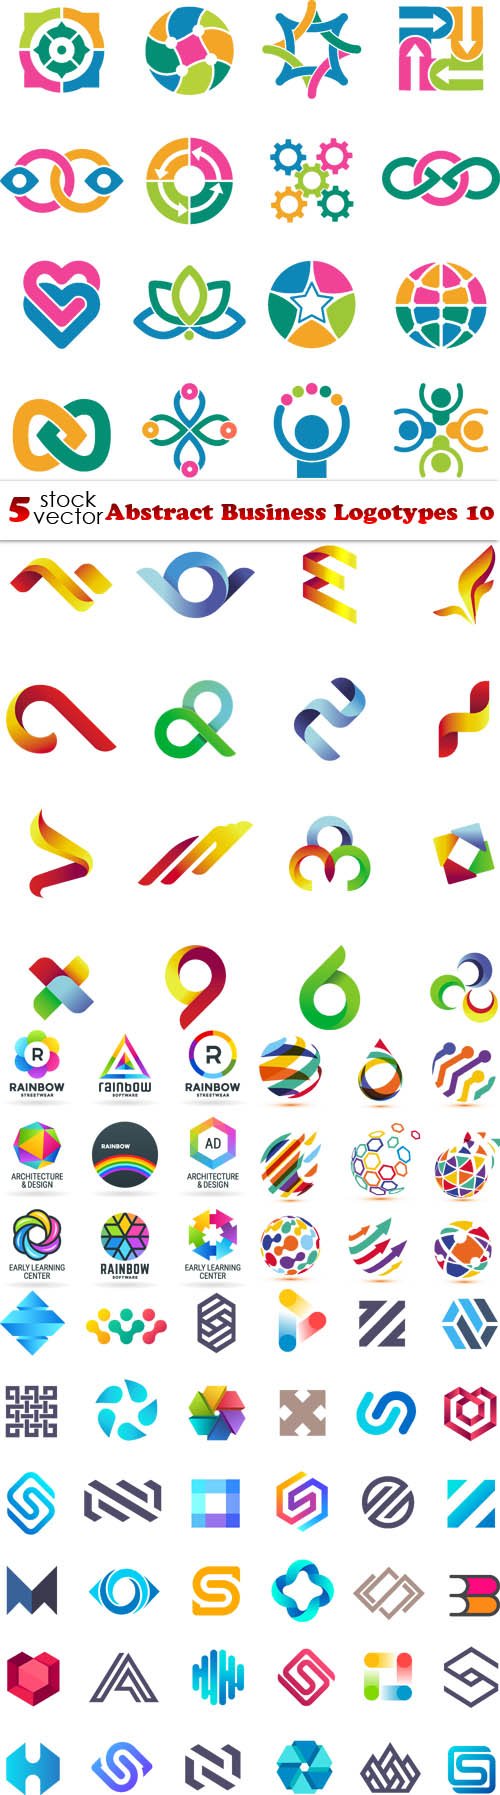 Vectors - Abstract Business Logotypes 100